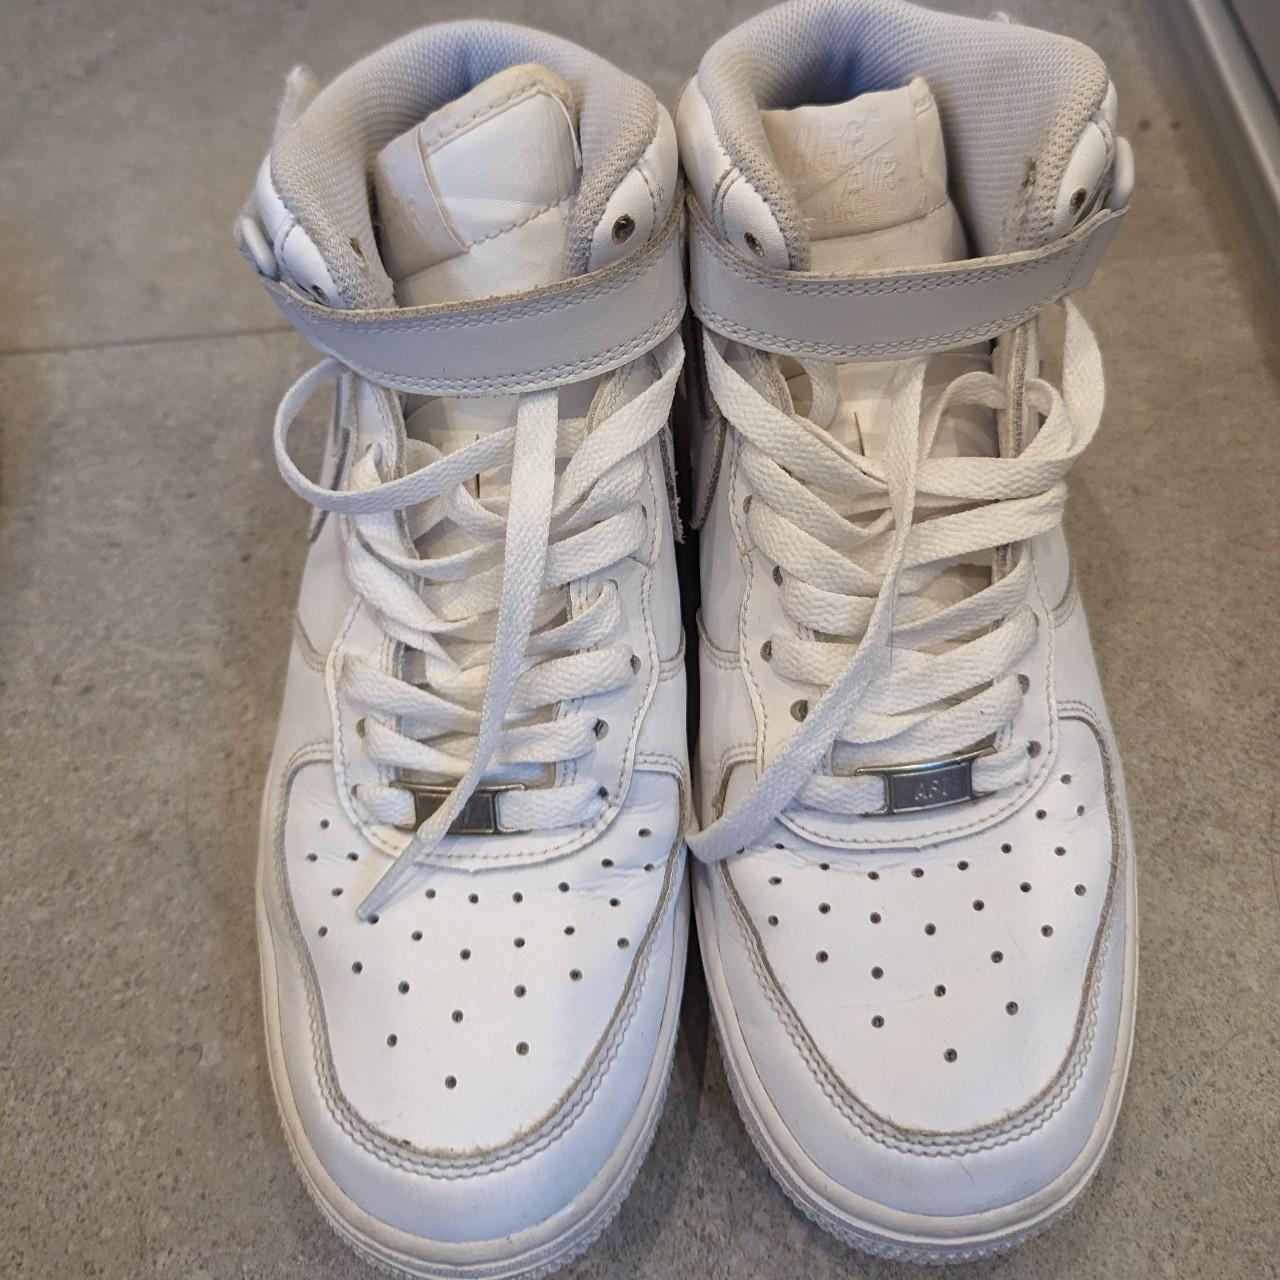 Air force 1 high tops white youth sneakers - Depop